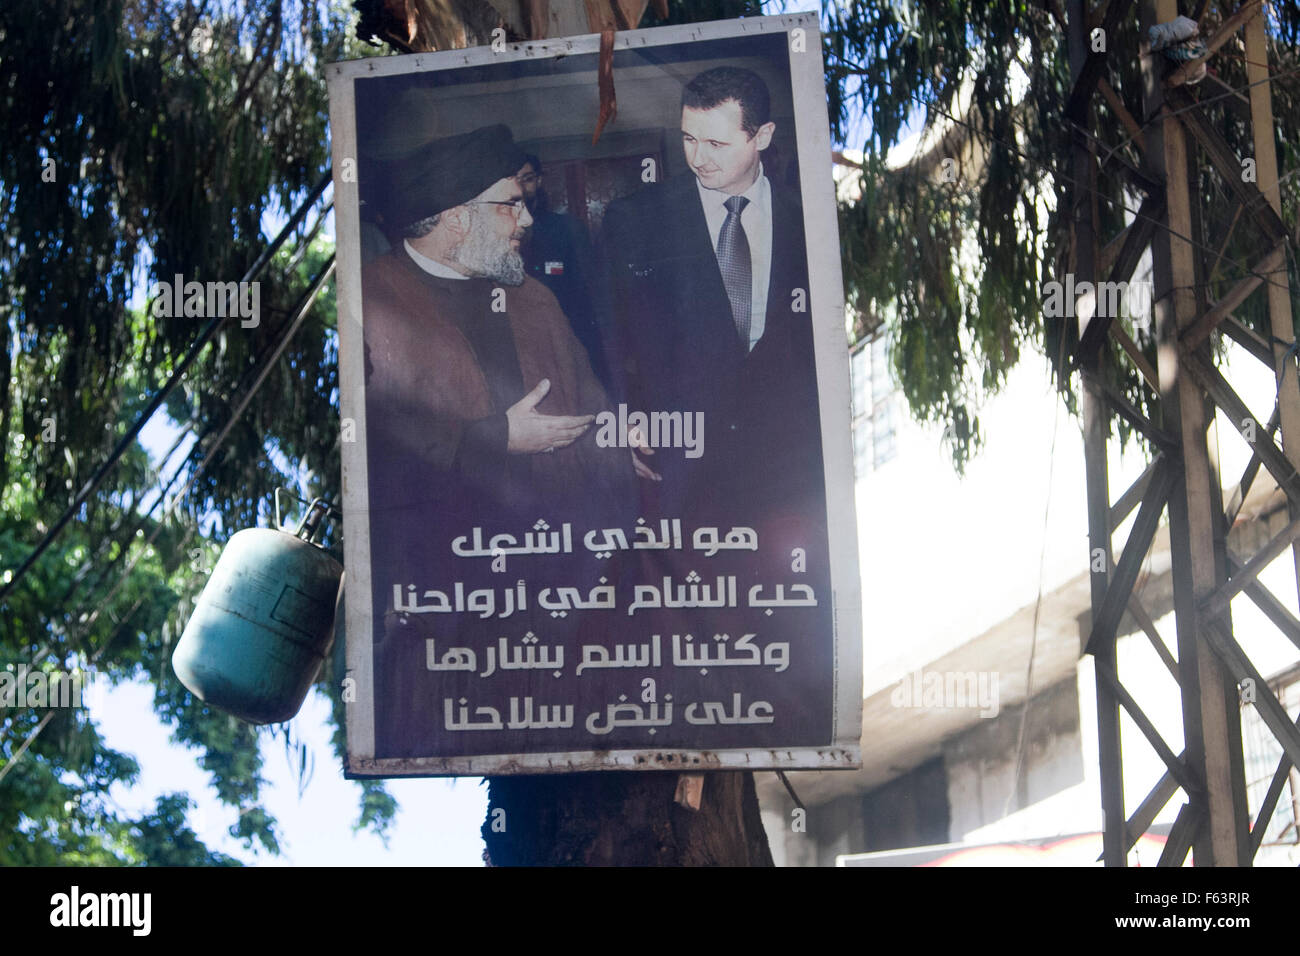 Beirut Lebanon, 11th November 2015. A poster showing President Assad of Syria (R) together with Hassan Nasrallah the Lebanese spiritual Leader of the paramilitary group Hezbollah Credit:  amer ghazzal/Alamy Live News Stock Photo